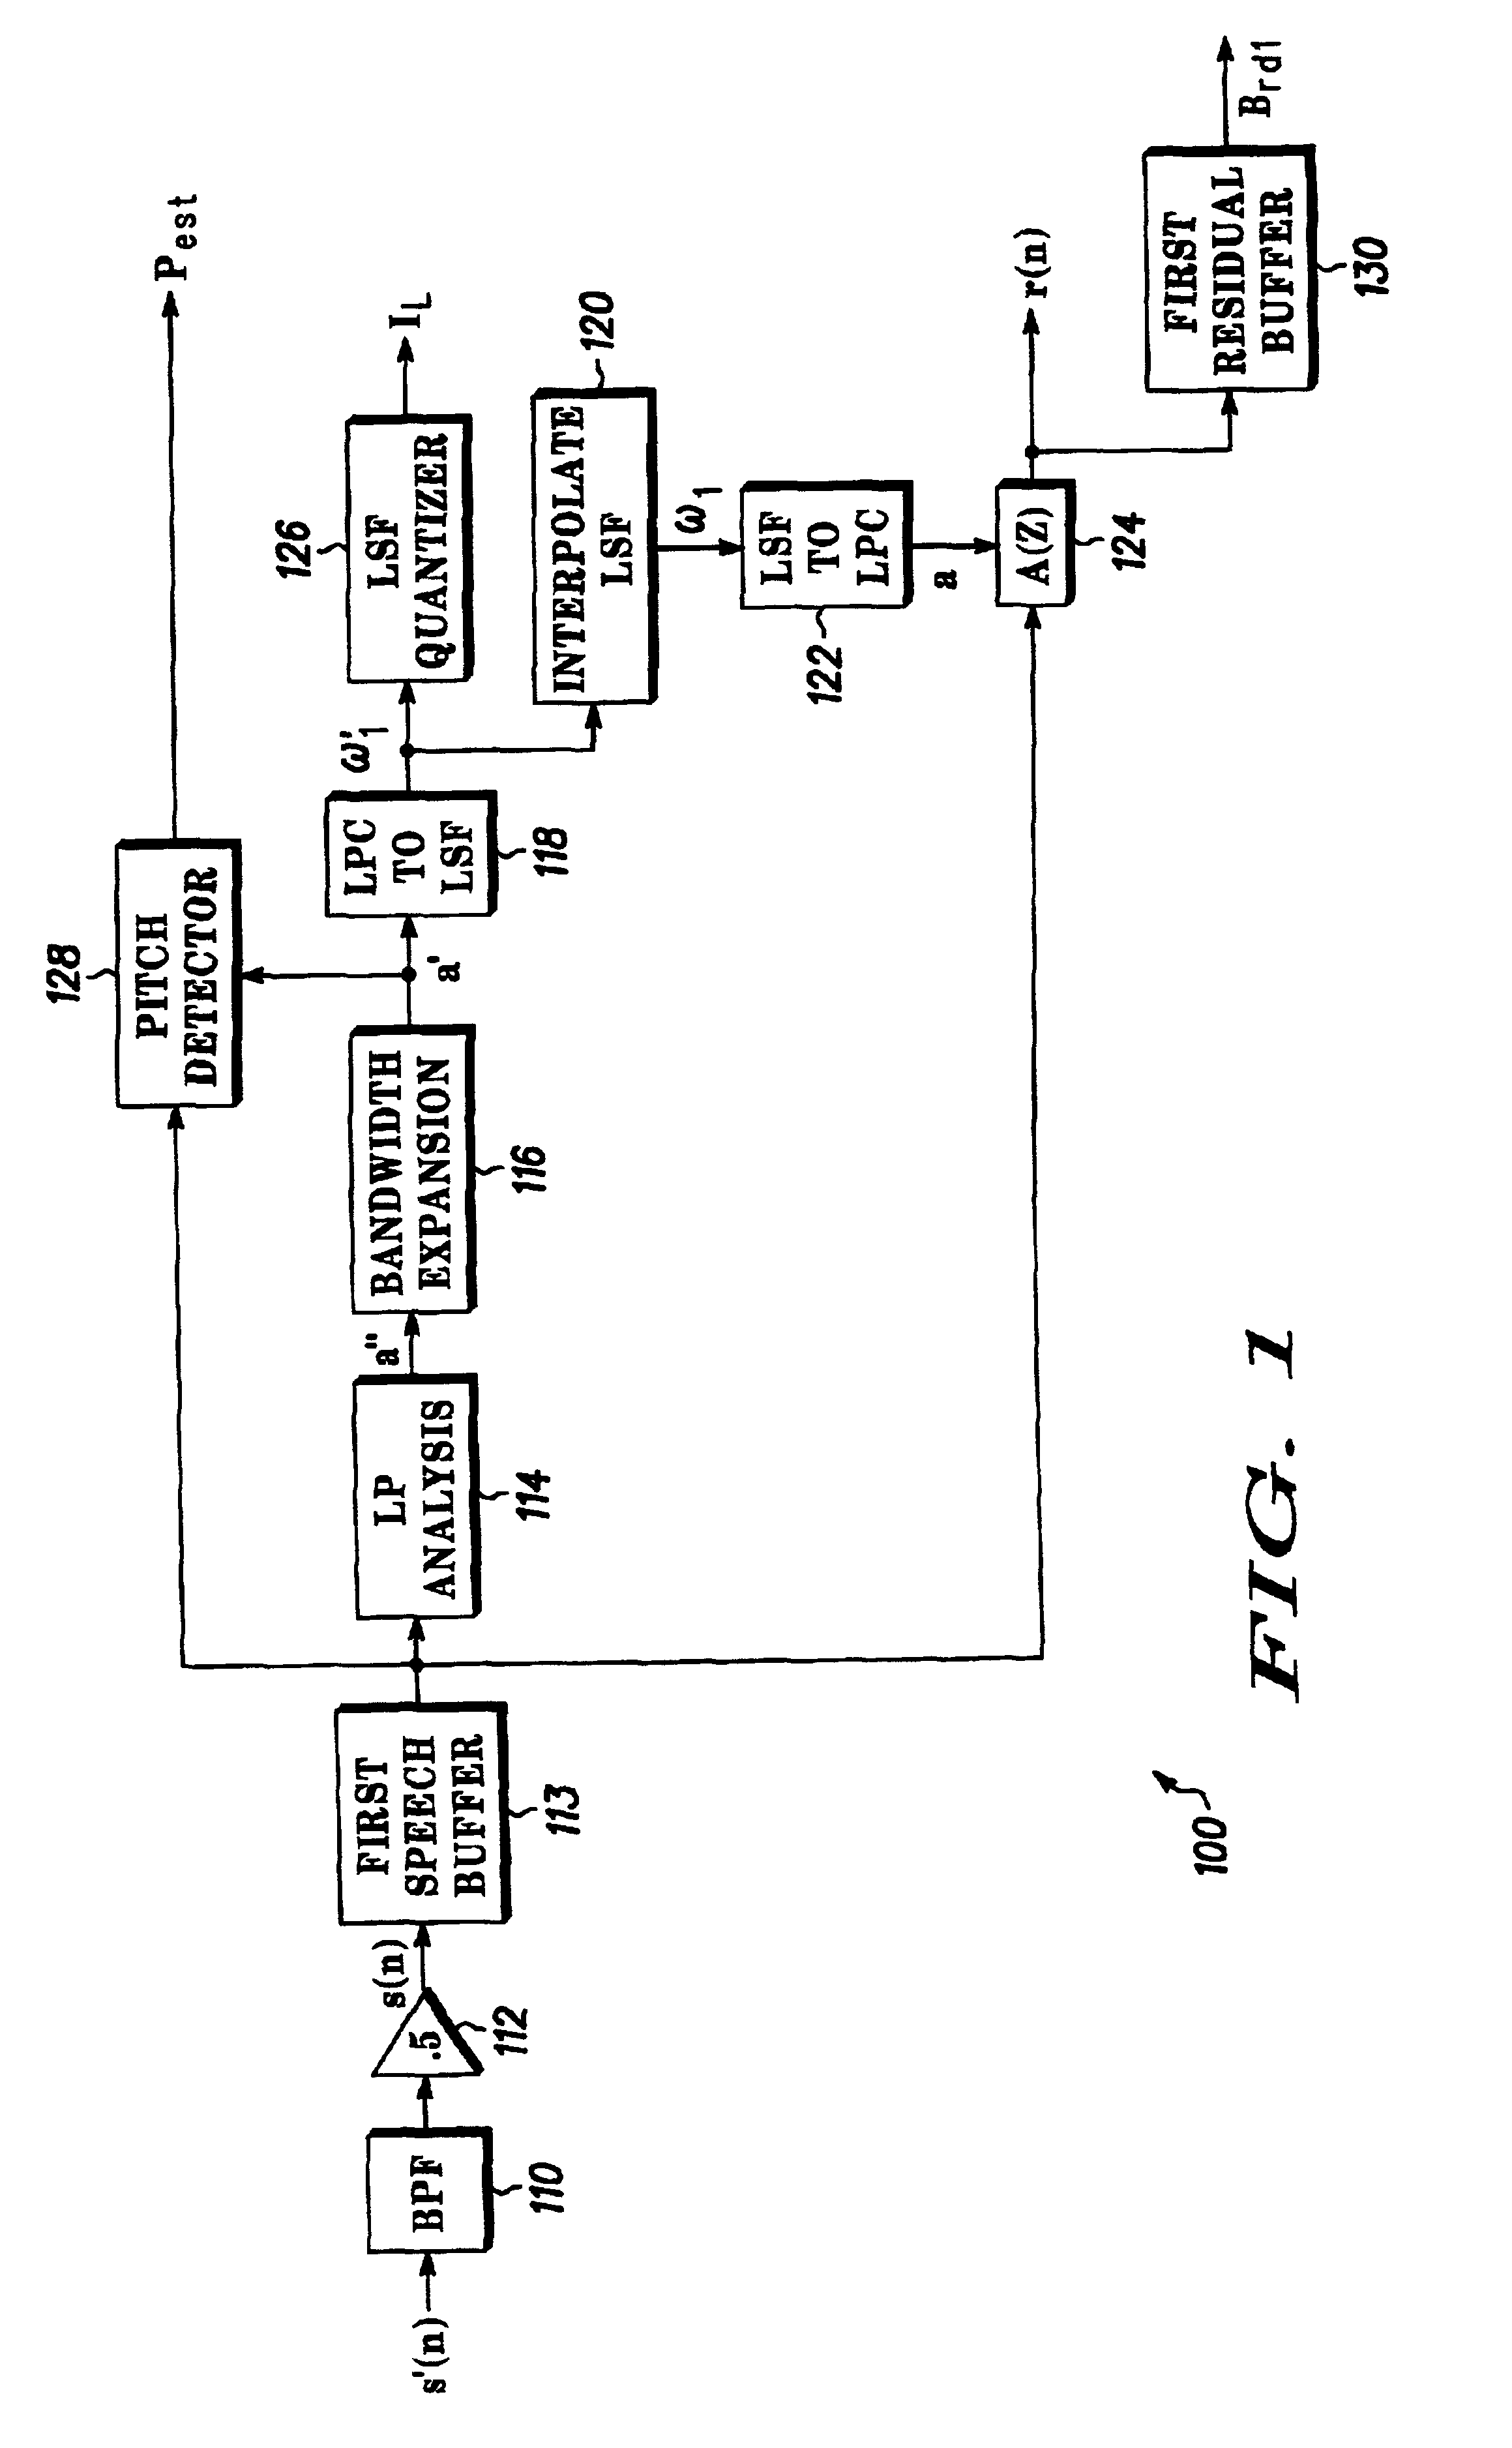 Phase excited linear prediction encoder